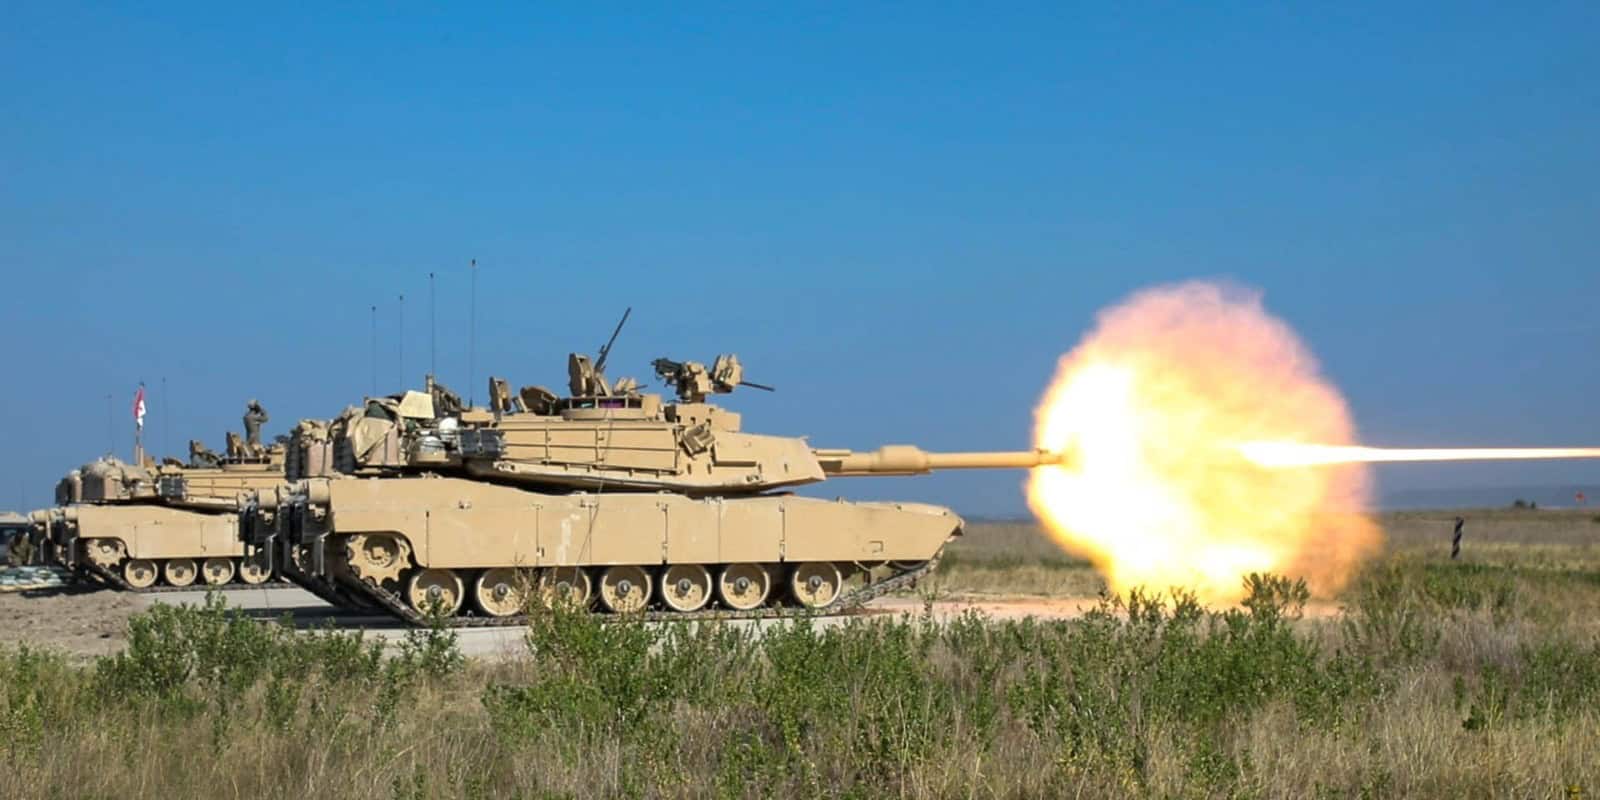 The Track Record of the M1 Abrams Speaks for Itself